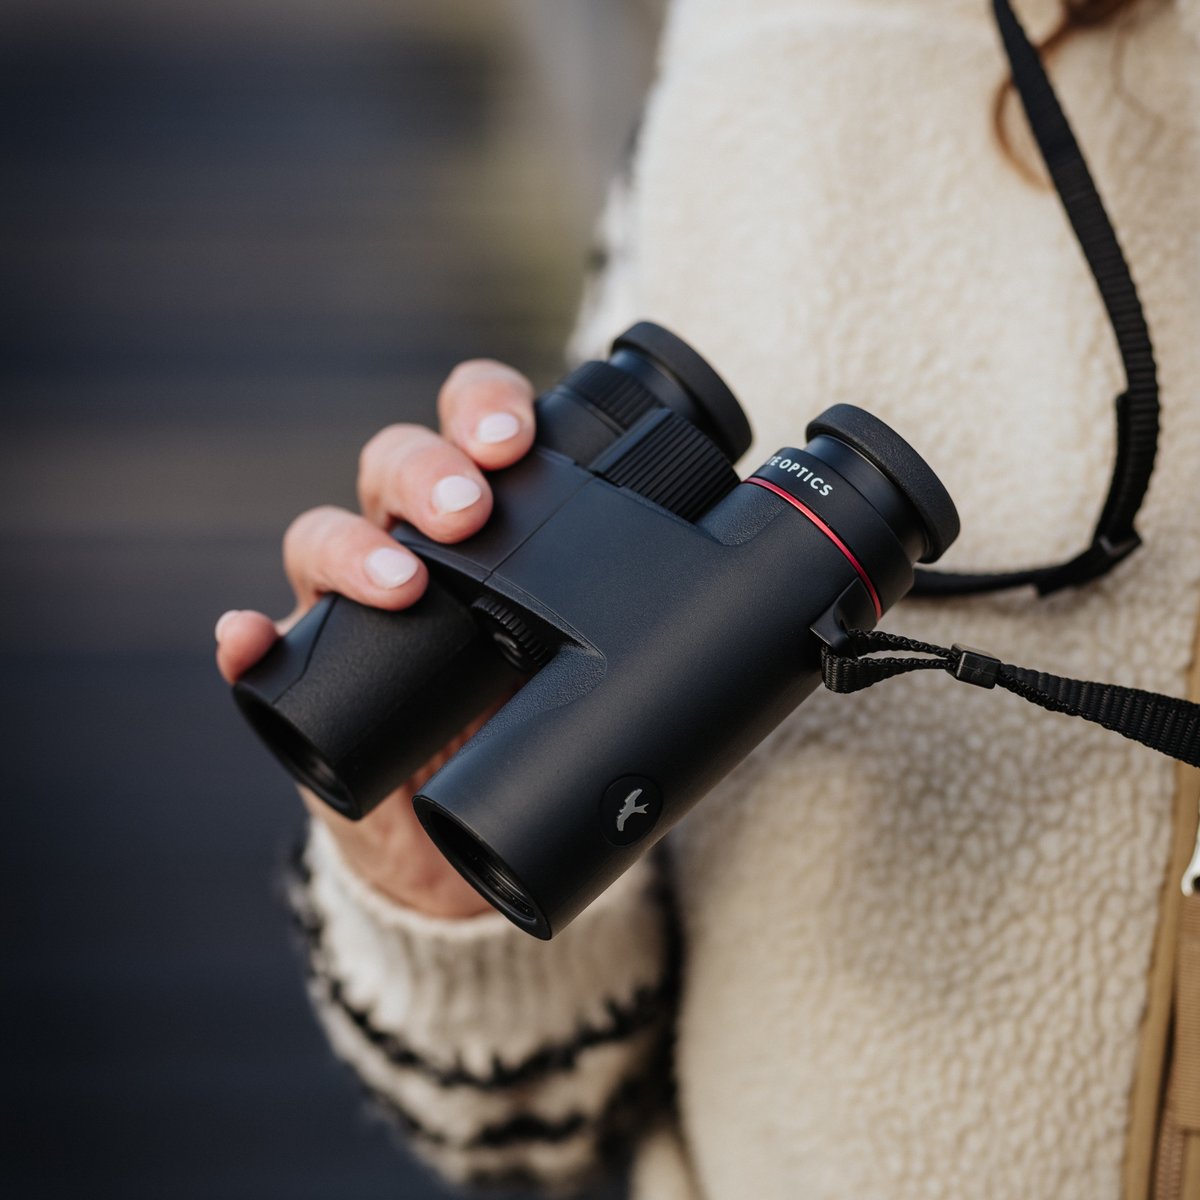 KITE LYNX HD+ The LYNX HD + is truly amazing , because in spite of all its optical technology, it is one of the smallest and lightest binoculars ever made. The LYNX HD + 30mm class is that compact, it fits the pockets of your vest.